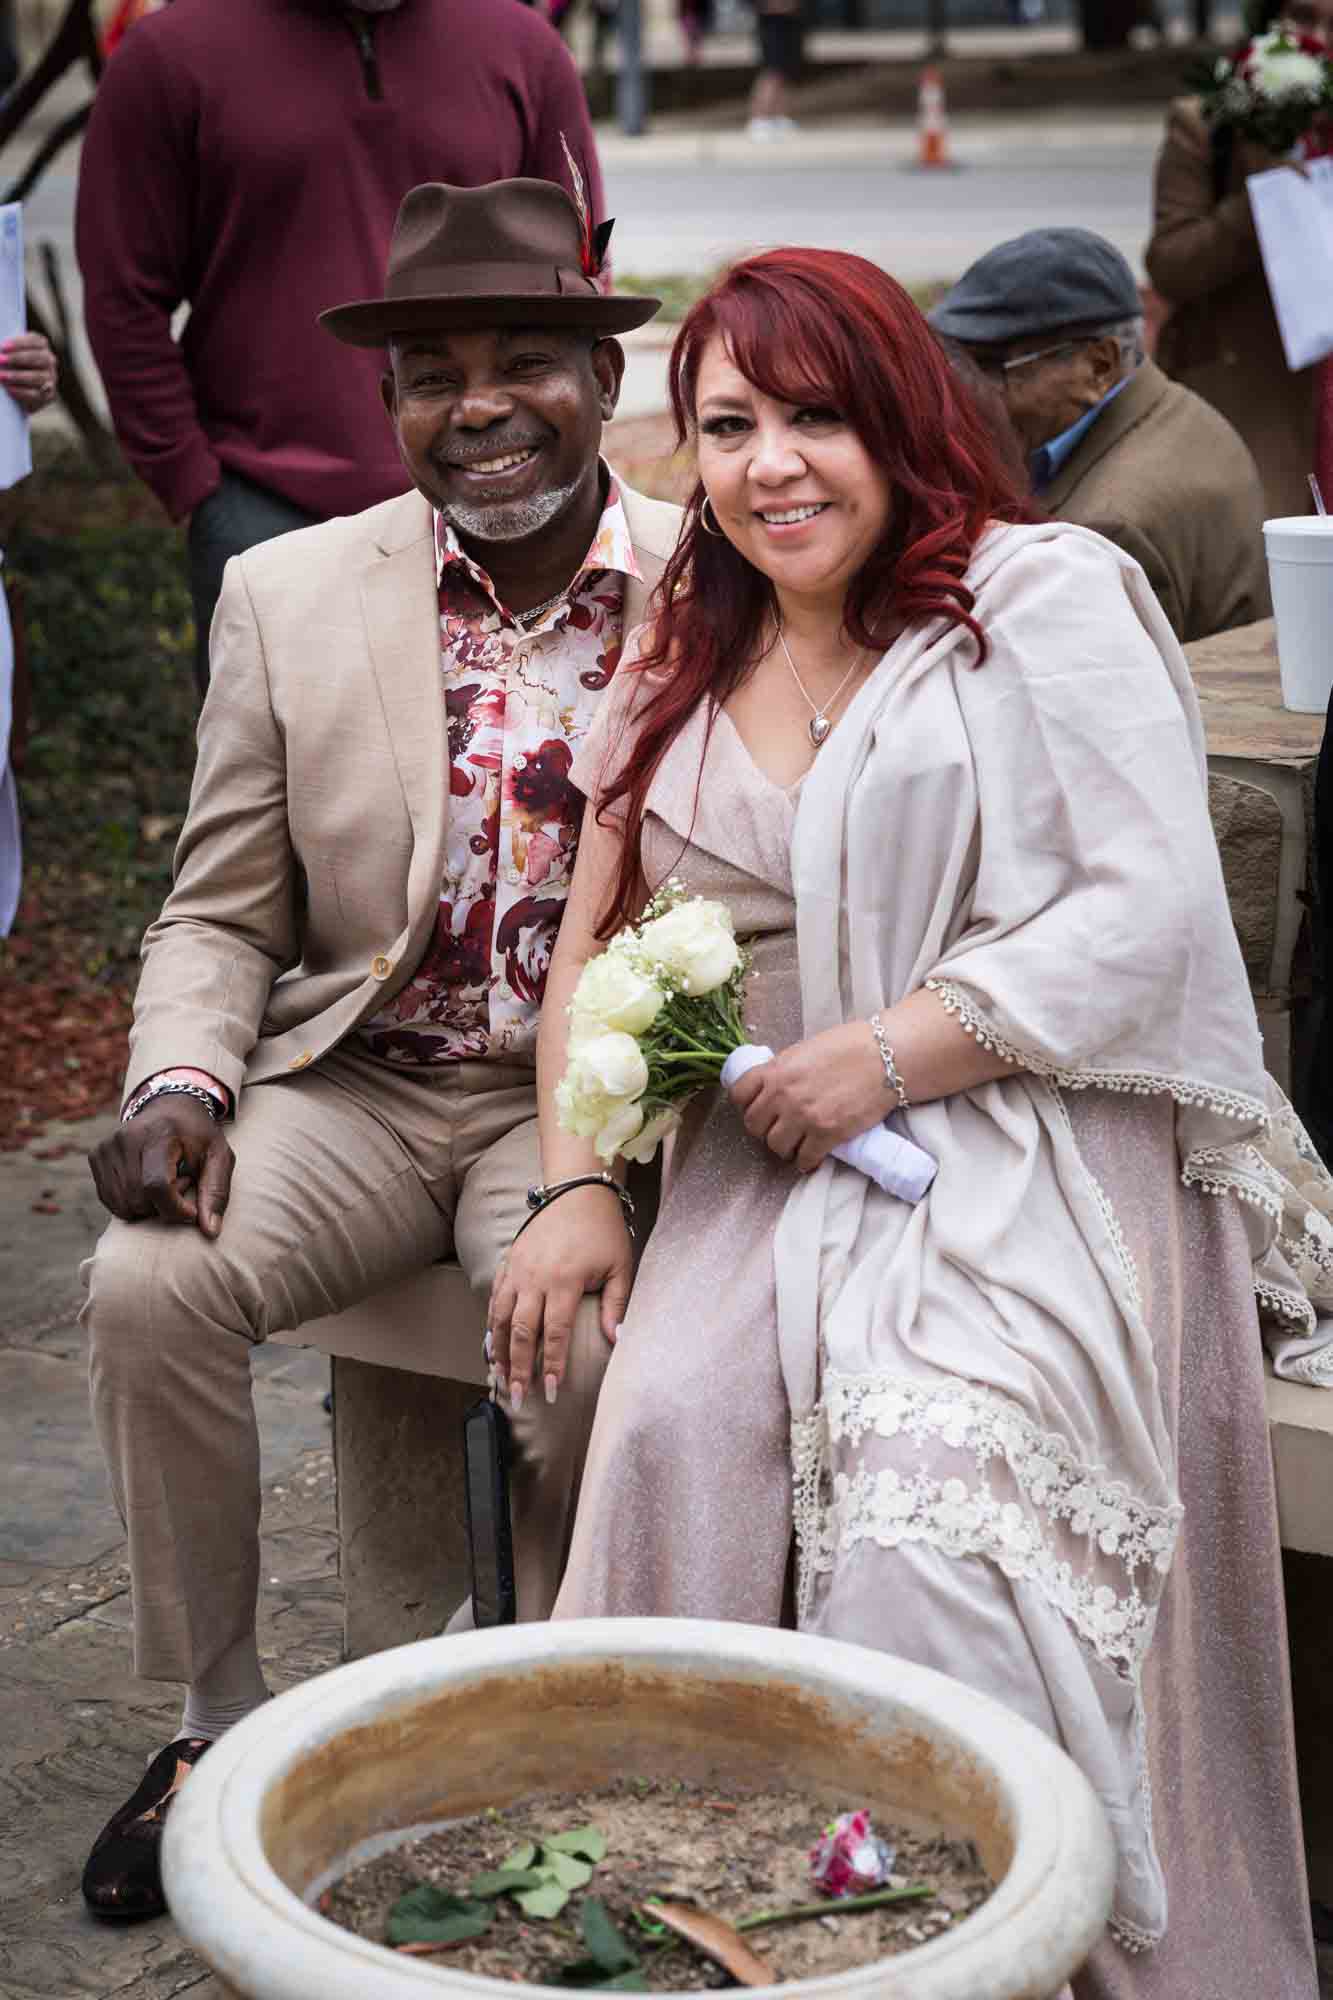 African American man wearing brown hat next to white bride with red hair for an article on the Bexar county mass wedding event